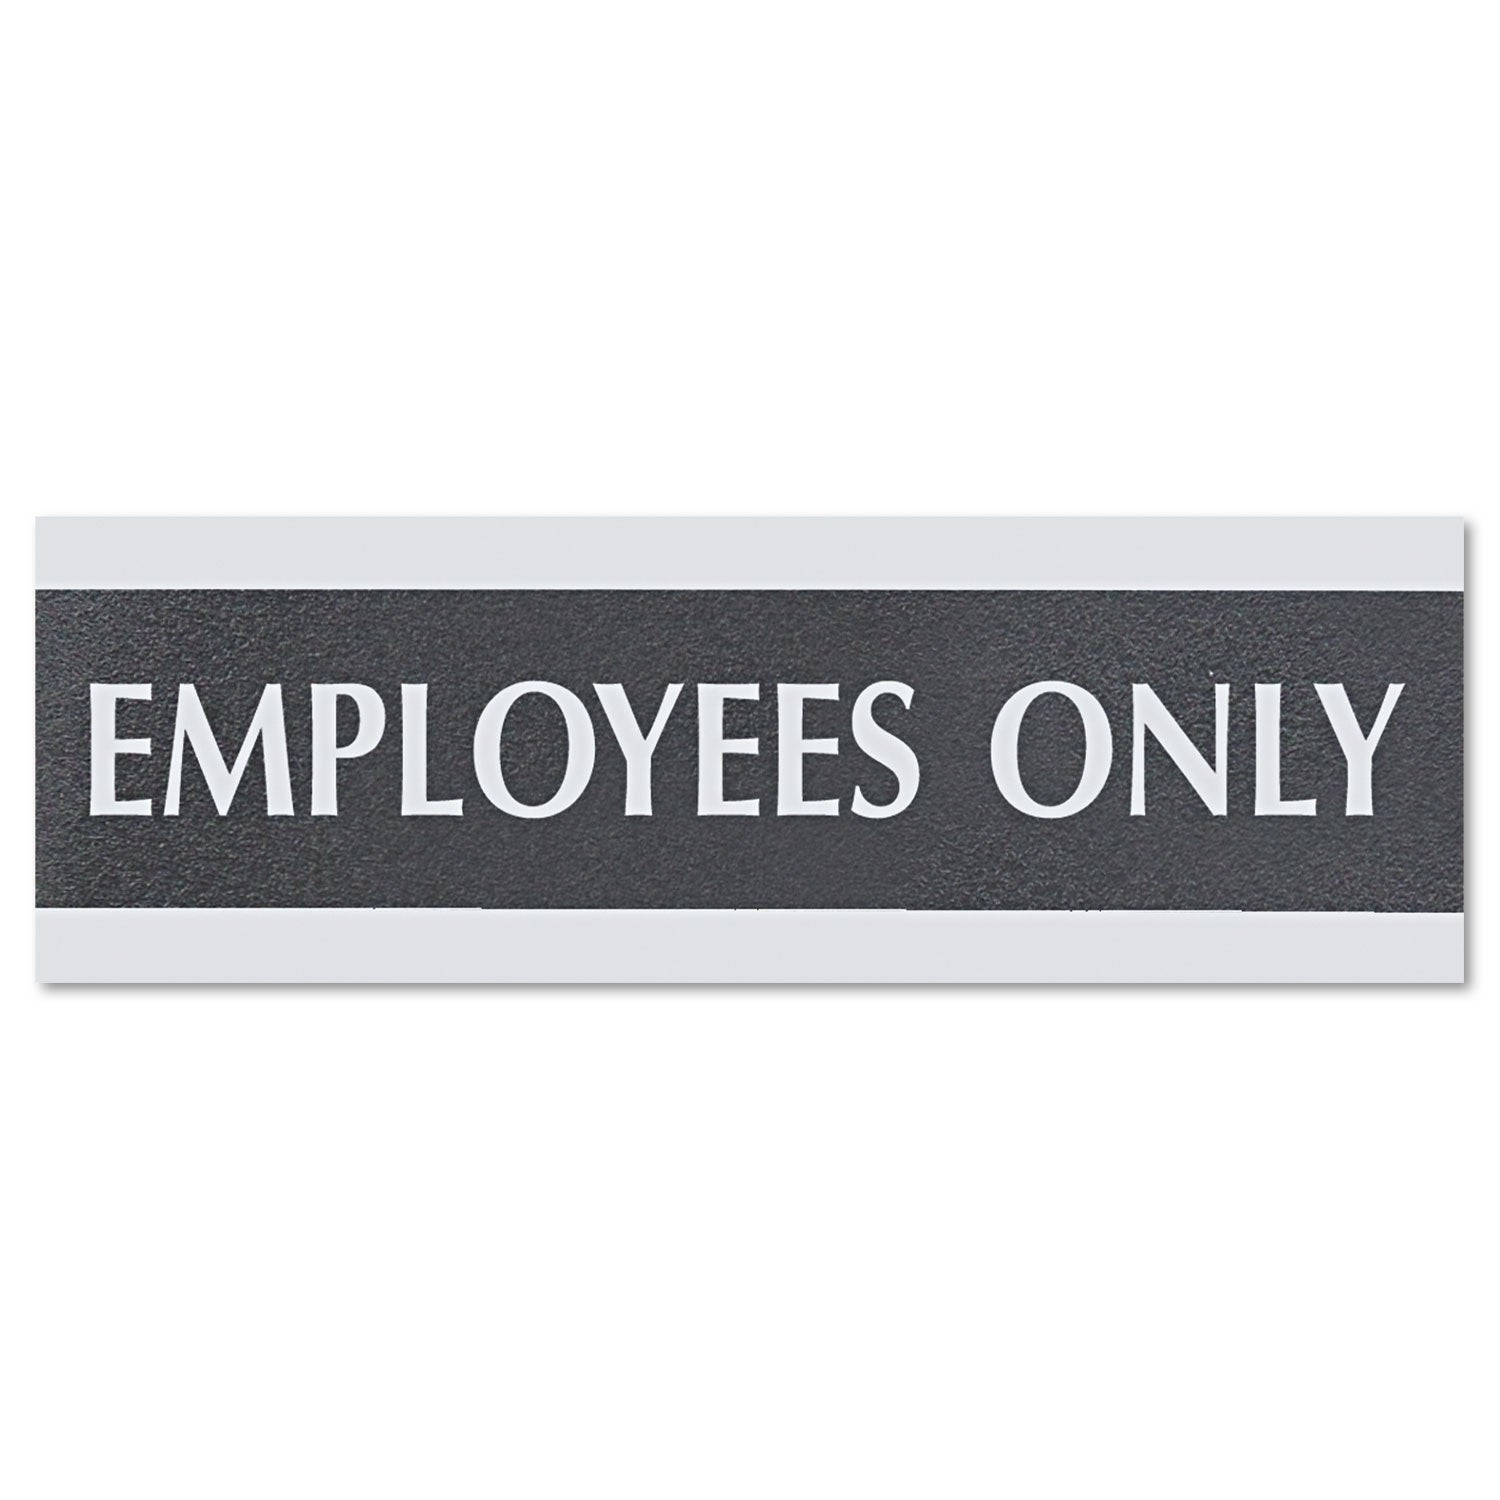 Century Series Office Sign, EMPLOYEES ONLY, 9 x 3, Black/Silver - 